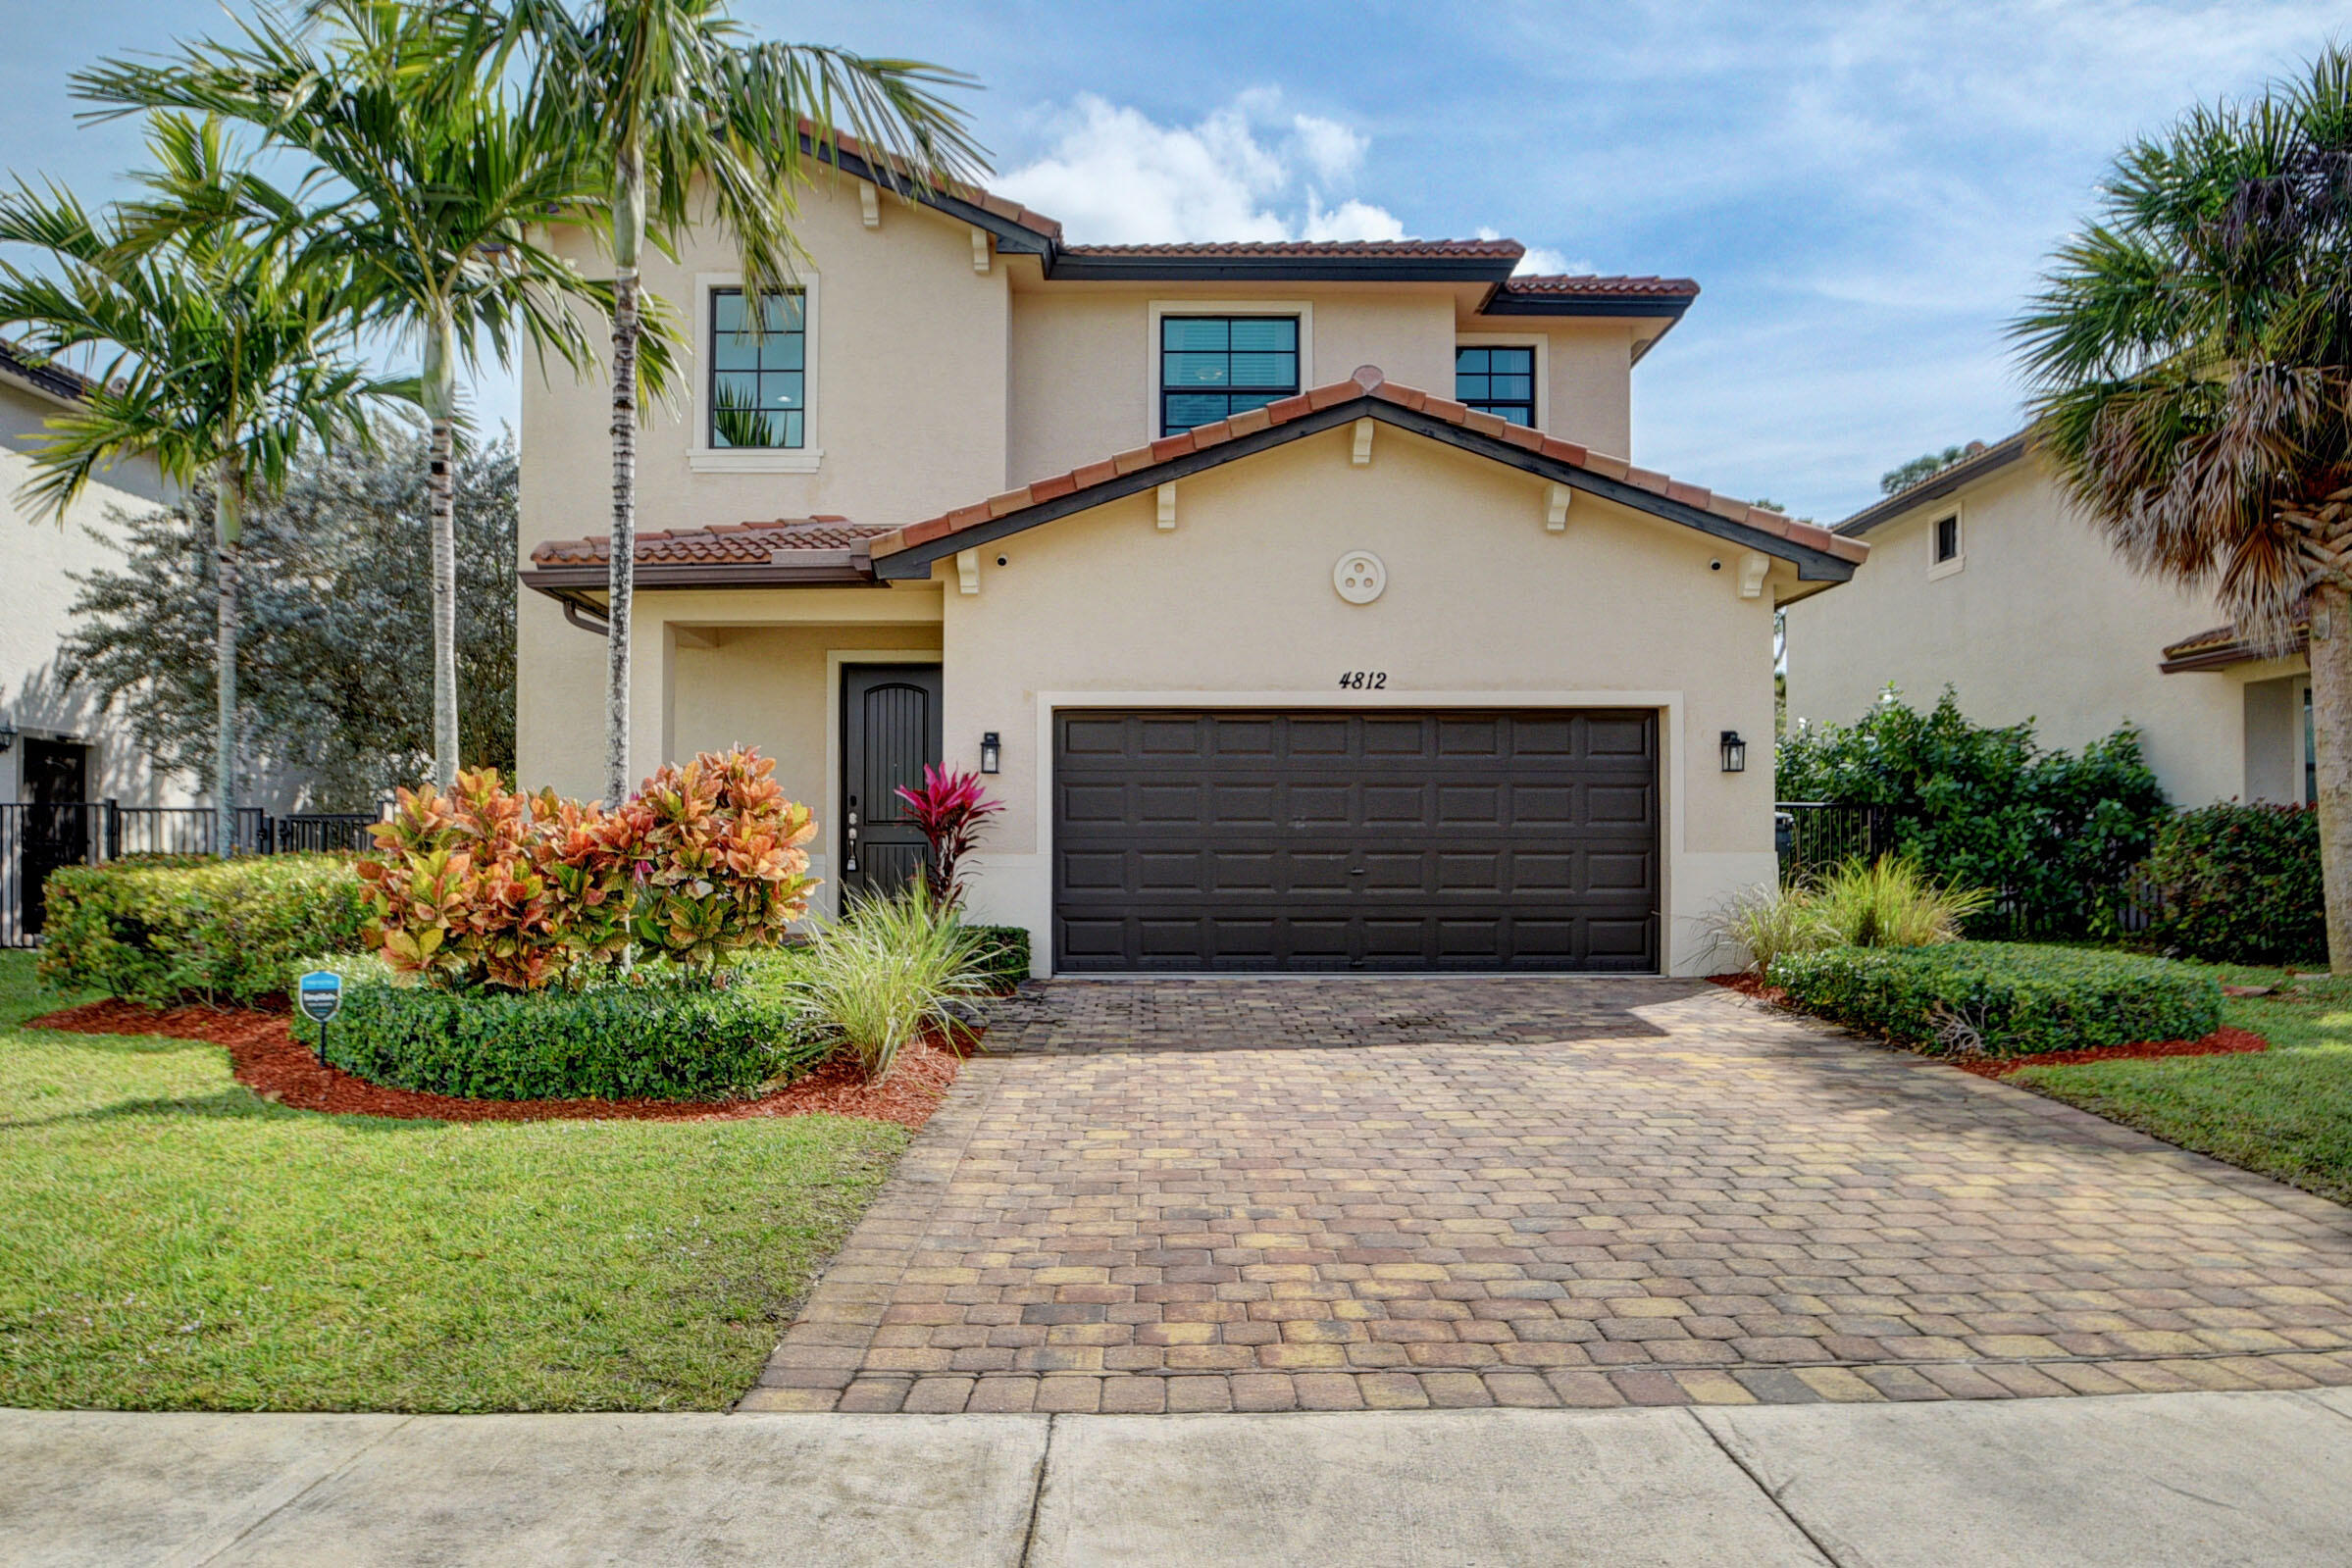 4812 Conifer Court, Greenacres, Palm Beach County, Florida - 5 Bedrooms  
3.5 Bathrooms - 